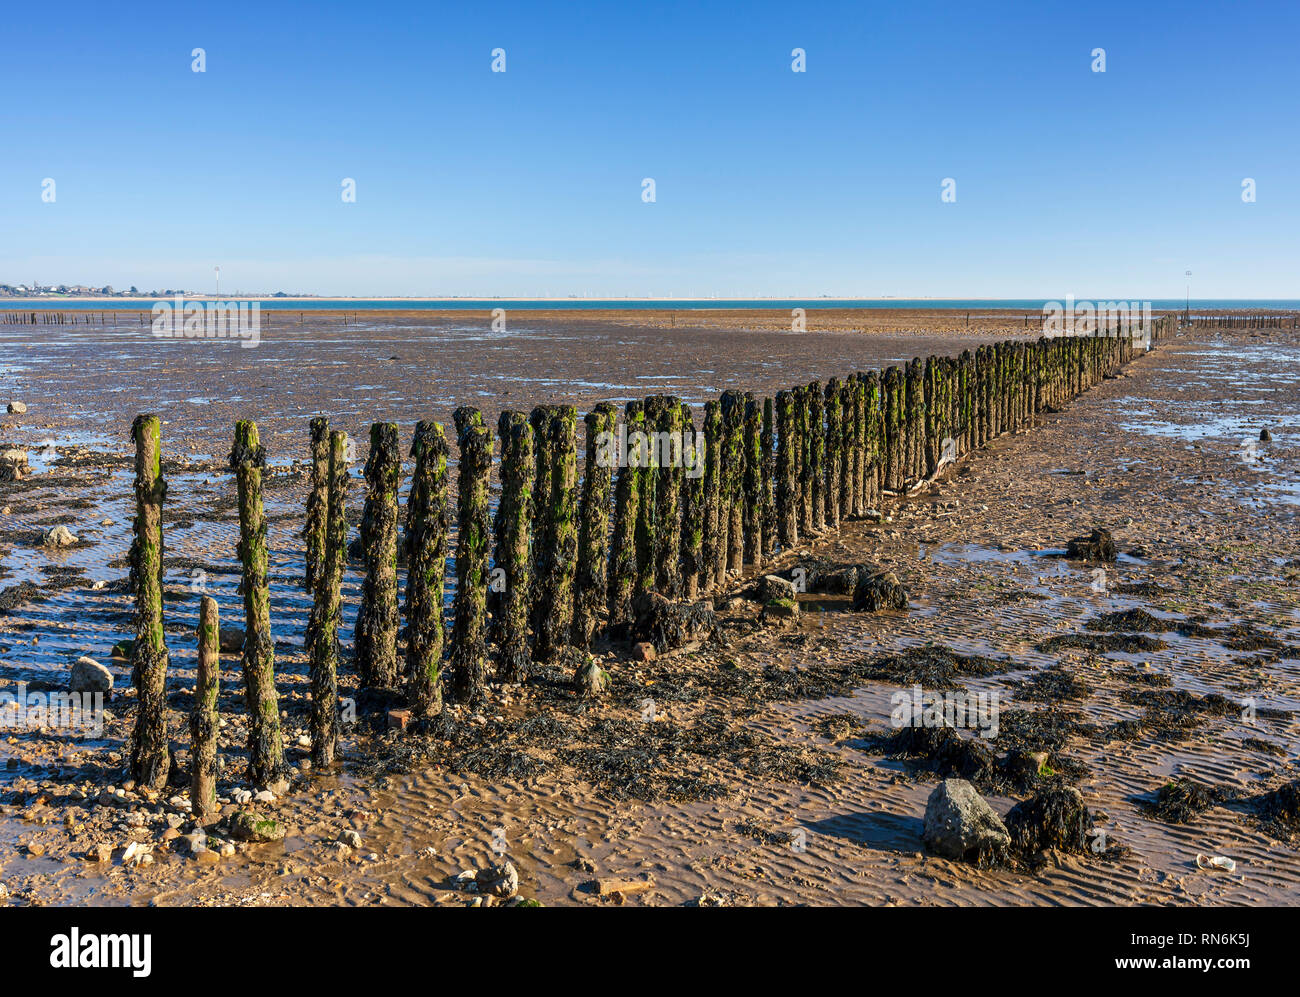 Polder scheme constructed on the mudflats using brushwood breakwaters. Cudmore Grove Country Park, East Mersea, Essex. Stock Photo